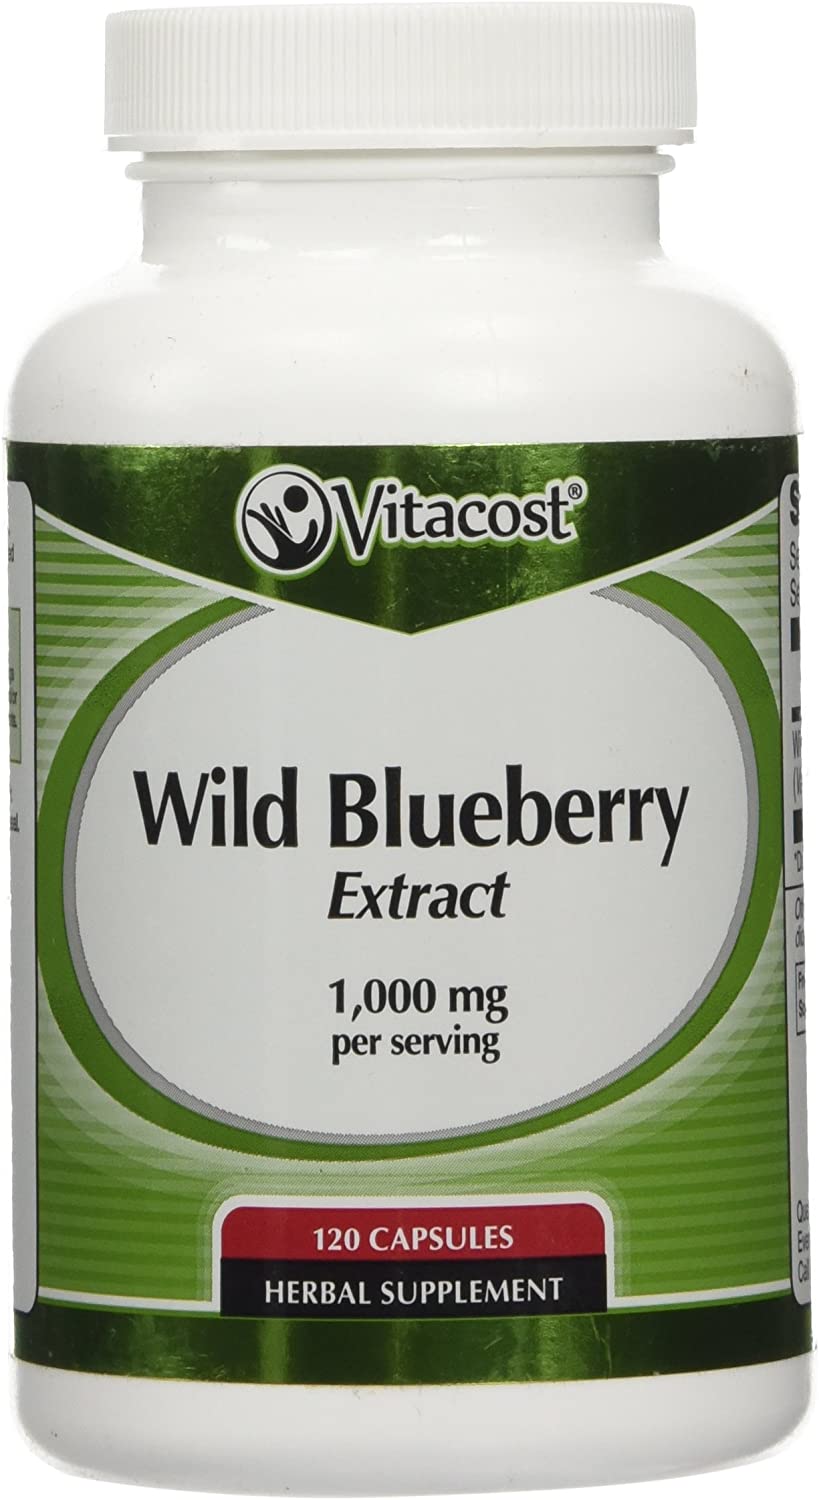 Best Blueberry Supplements – Top 10 Brands Reviewed for 2022 14